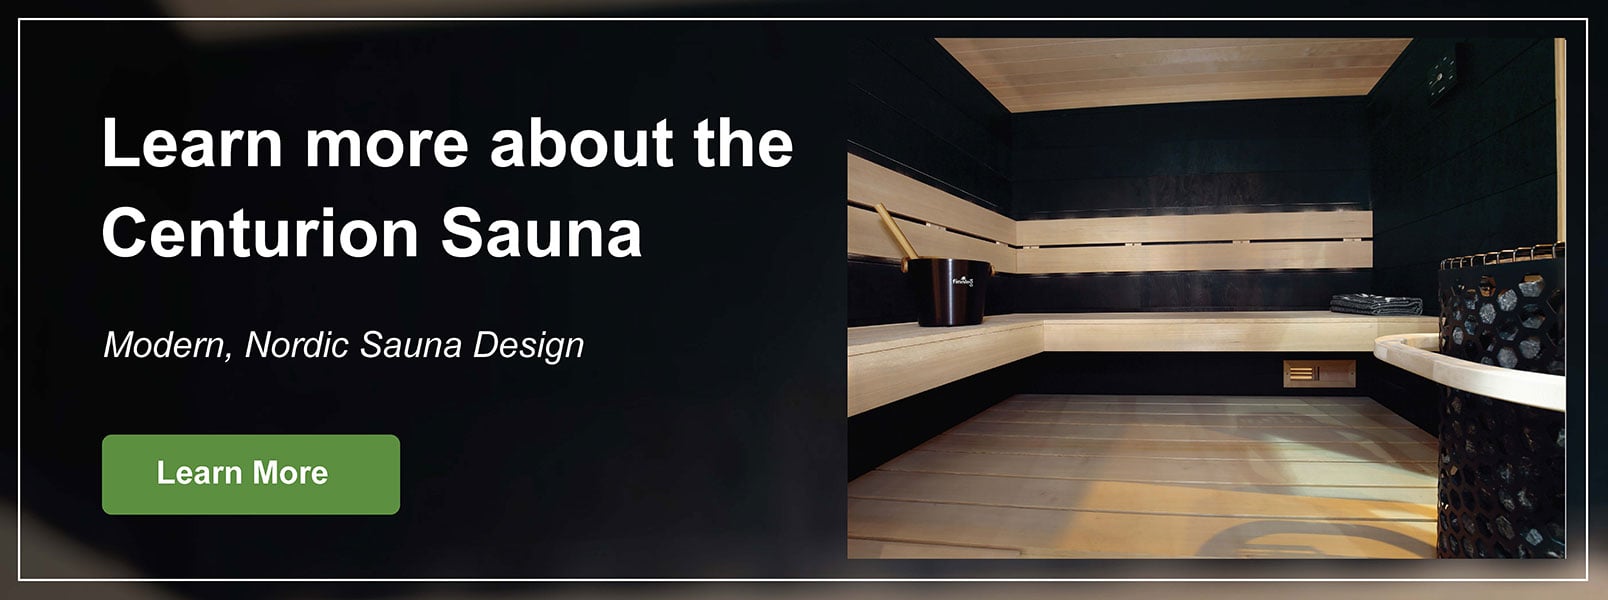 Learn More about the Centurion Sauna